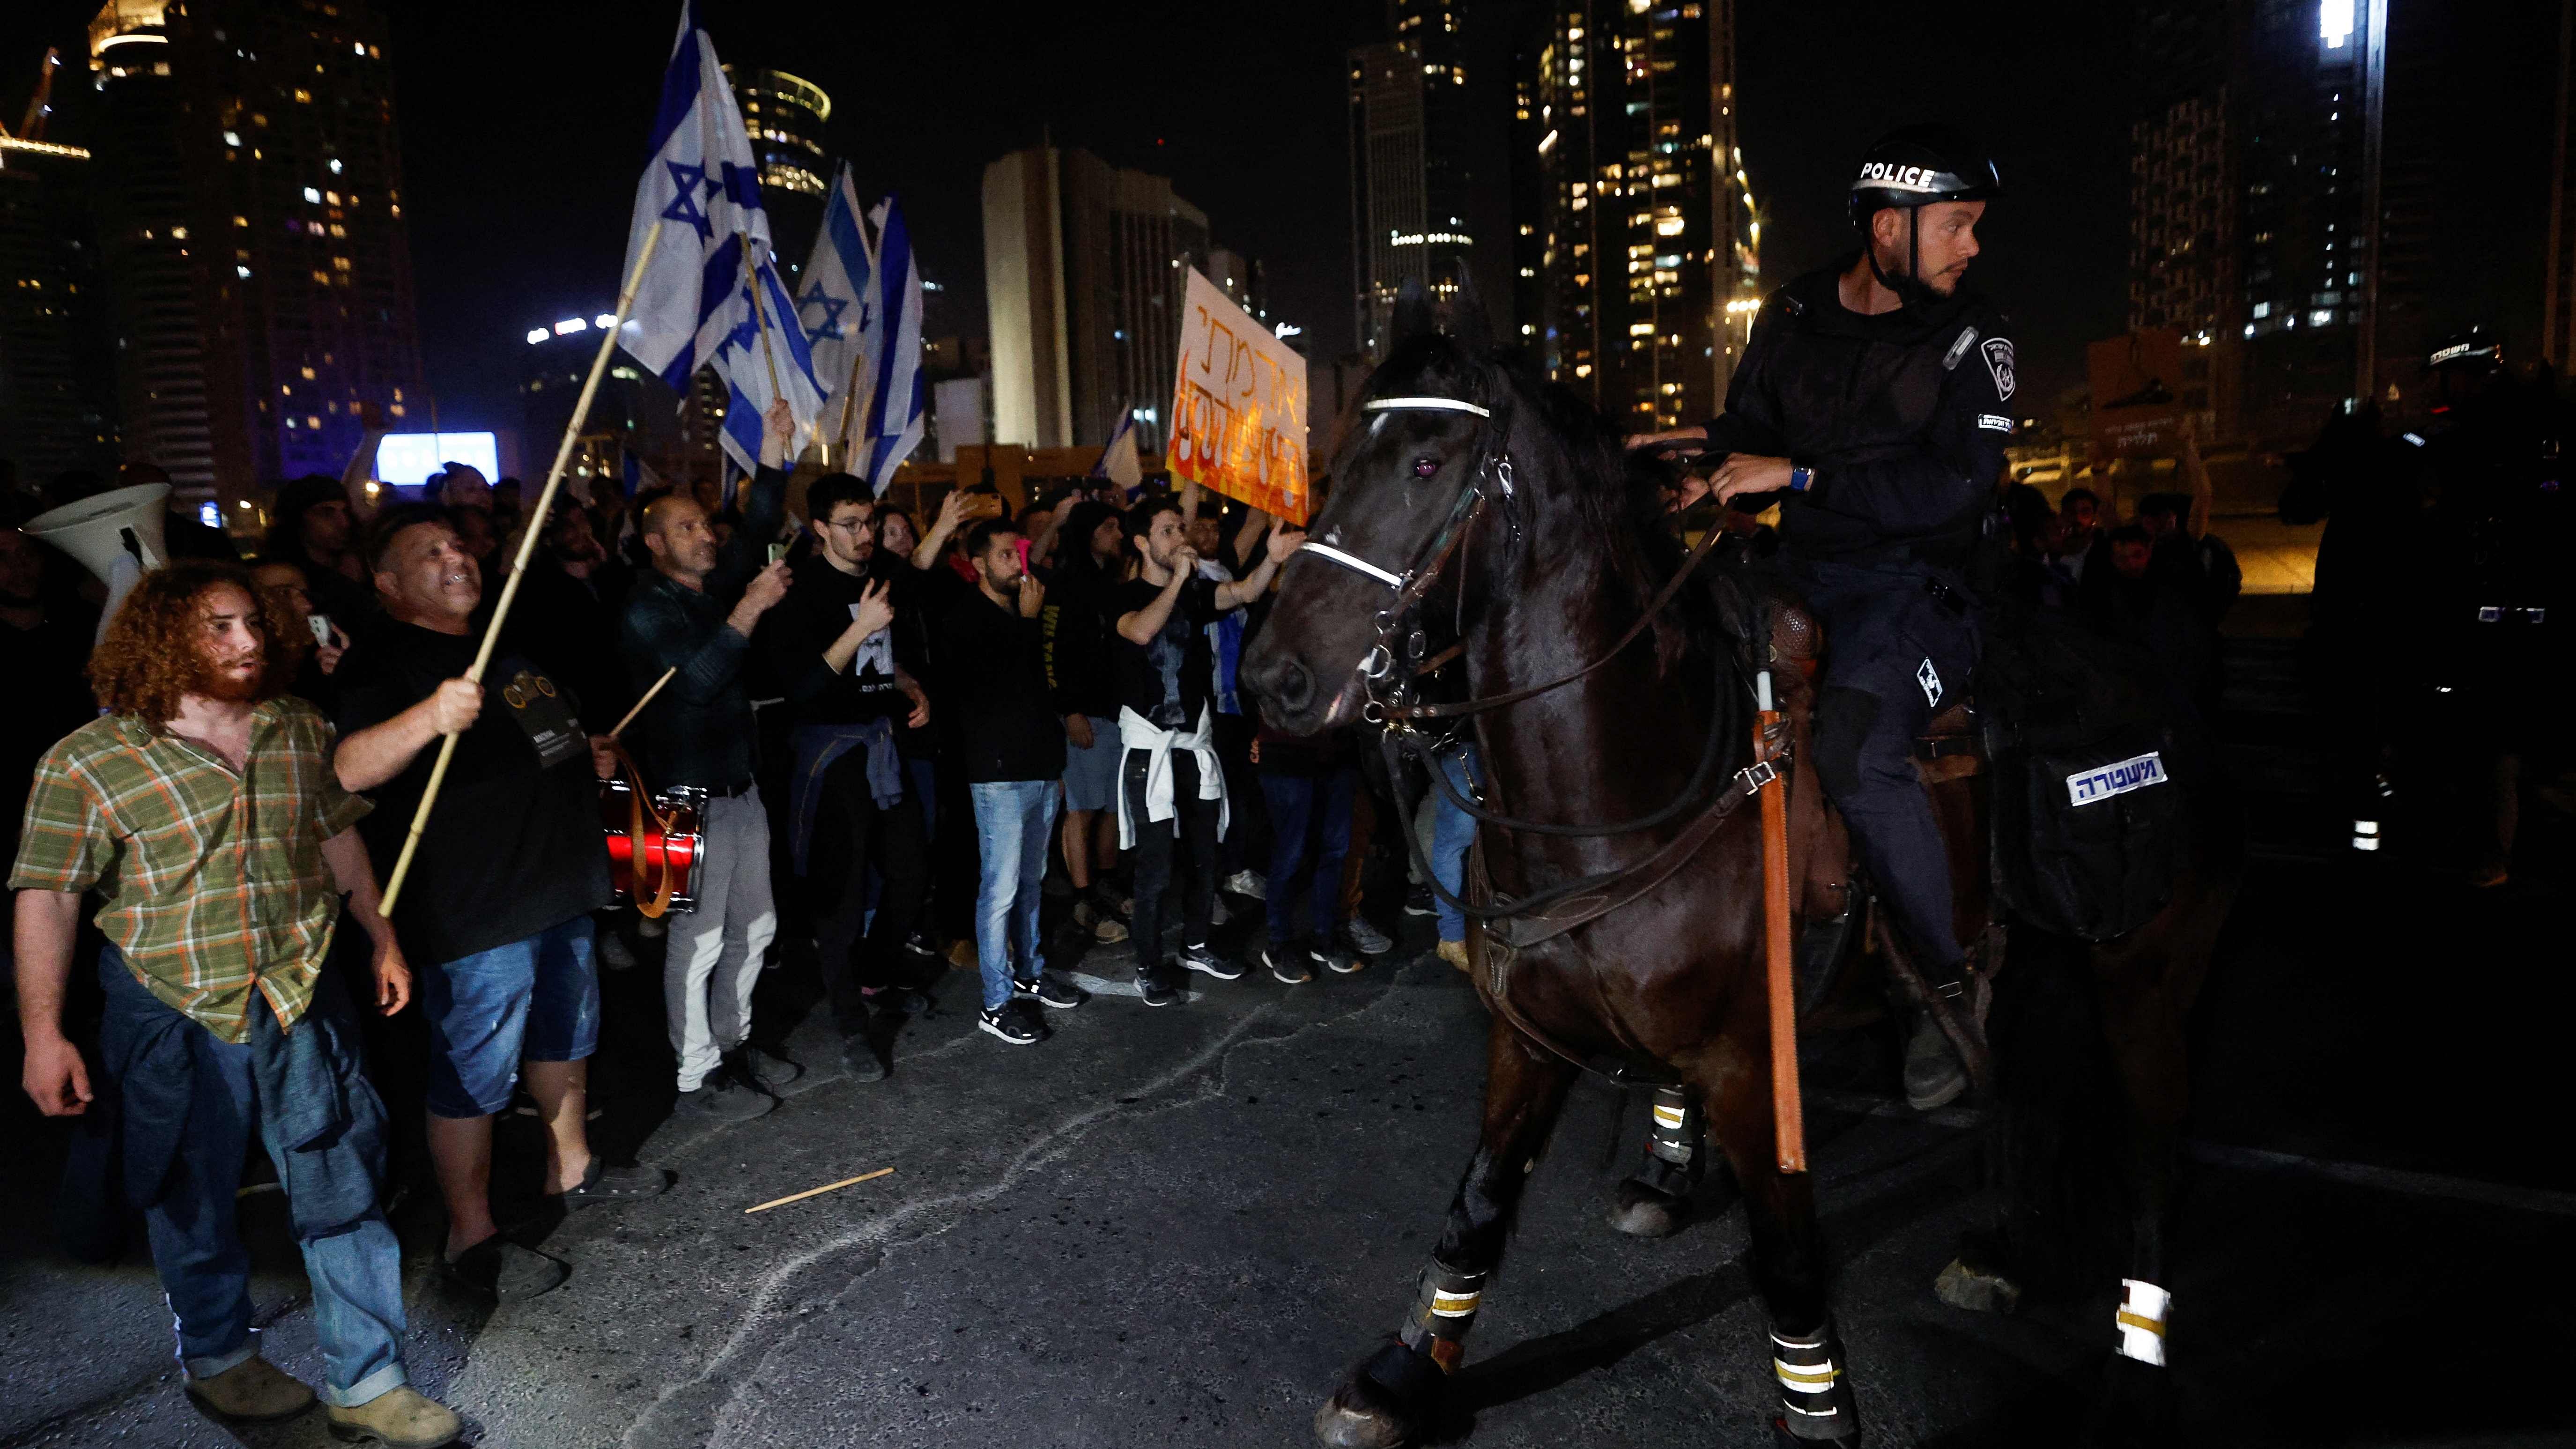 People stand next to mounted police member during a demonstration, as Israeli Prime Minister Benjamin Netanyahu's nationalist coalition government presses on with its contentious judicial overhaul, in Tel Aviv. Credit: Reuters Photo